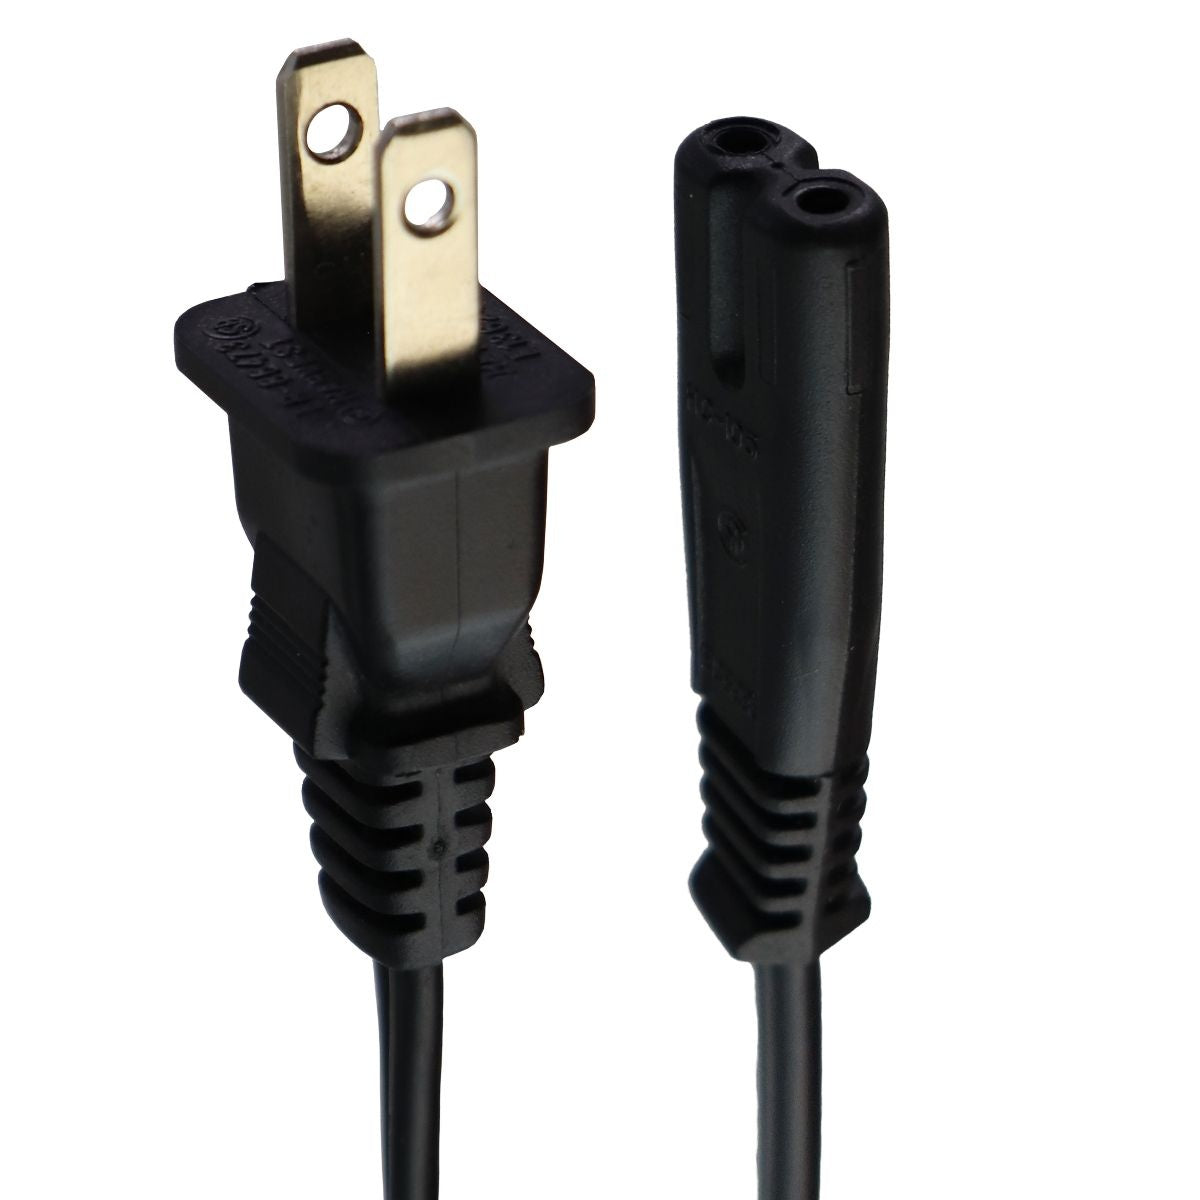 HARVEST Power Supply Cable with 2 Round Prongs (E140661) - Black Computer/Network - Plugs, Jacks & Wall Plates Harvest    - Simple Cell Bulk Wholesale Pricing - USA Seller